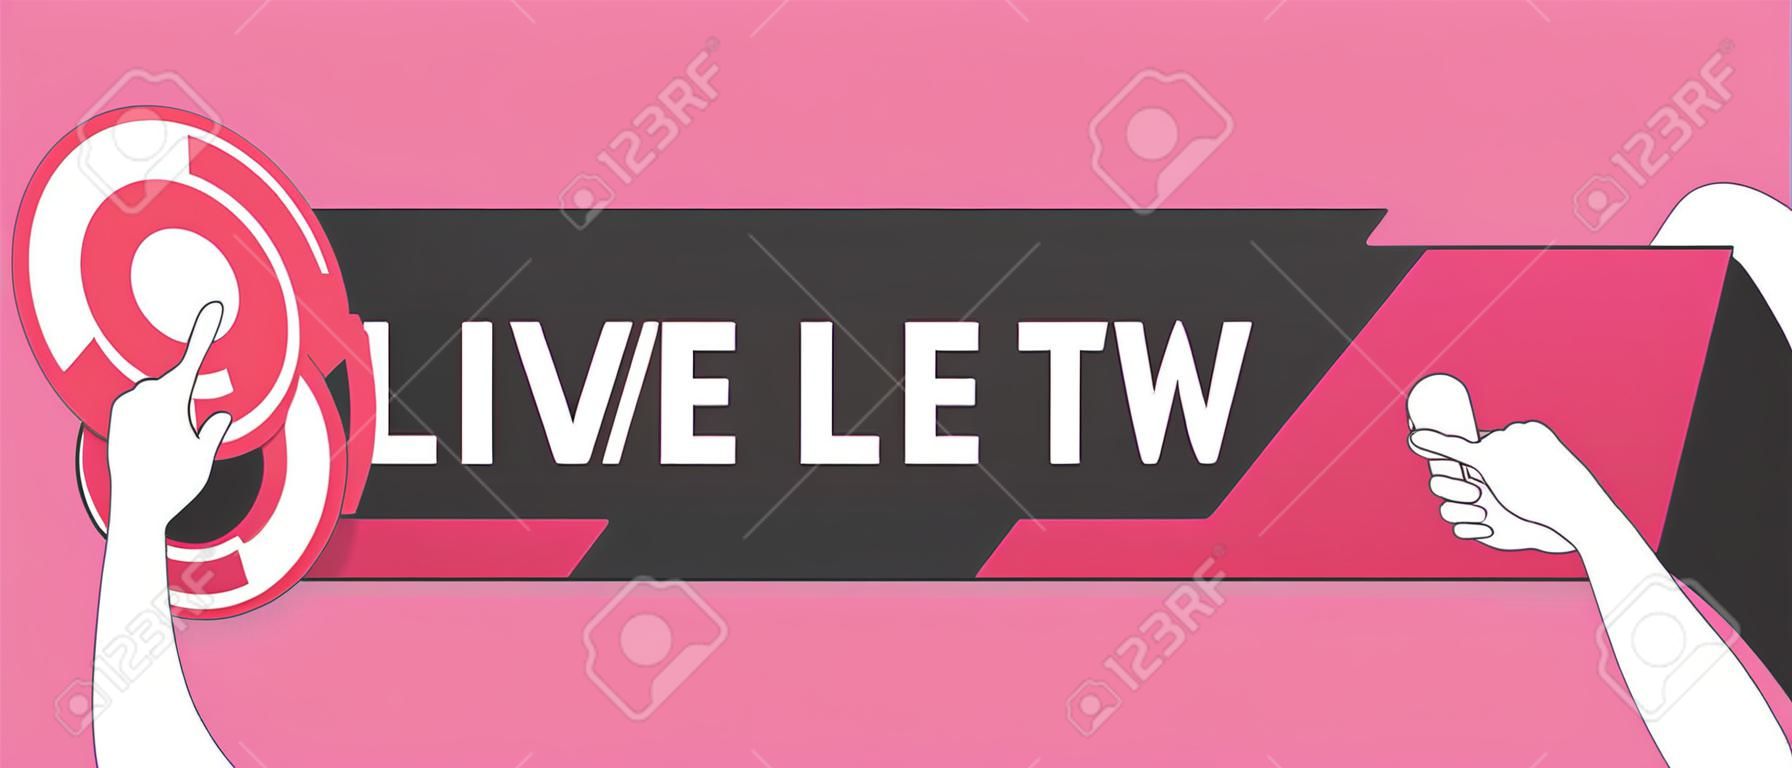 Red Live streaming logo - vector design element with play button for news and TV or online broadcasting